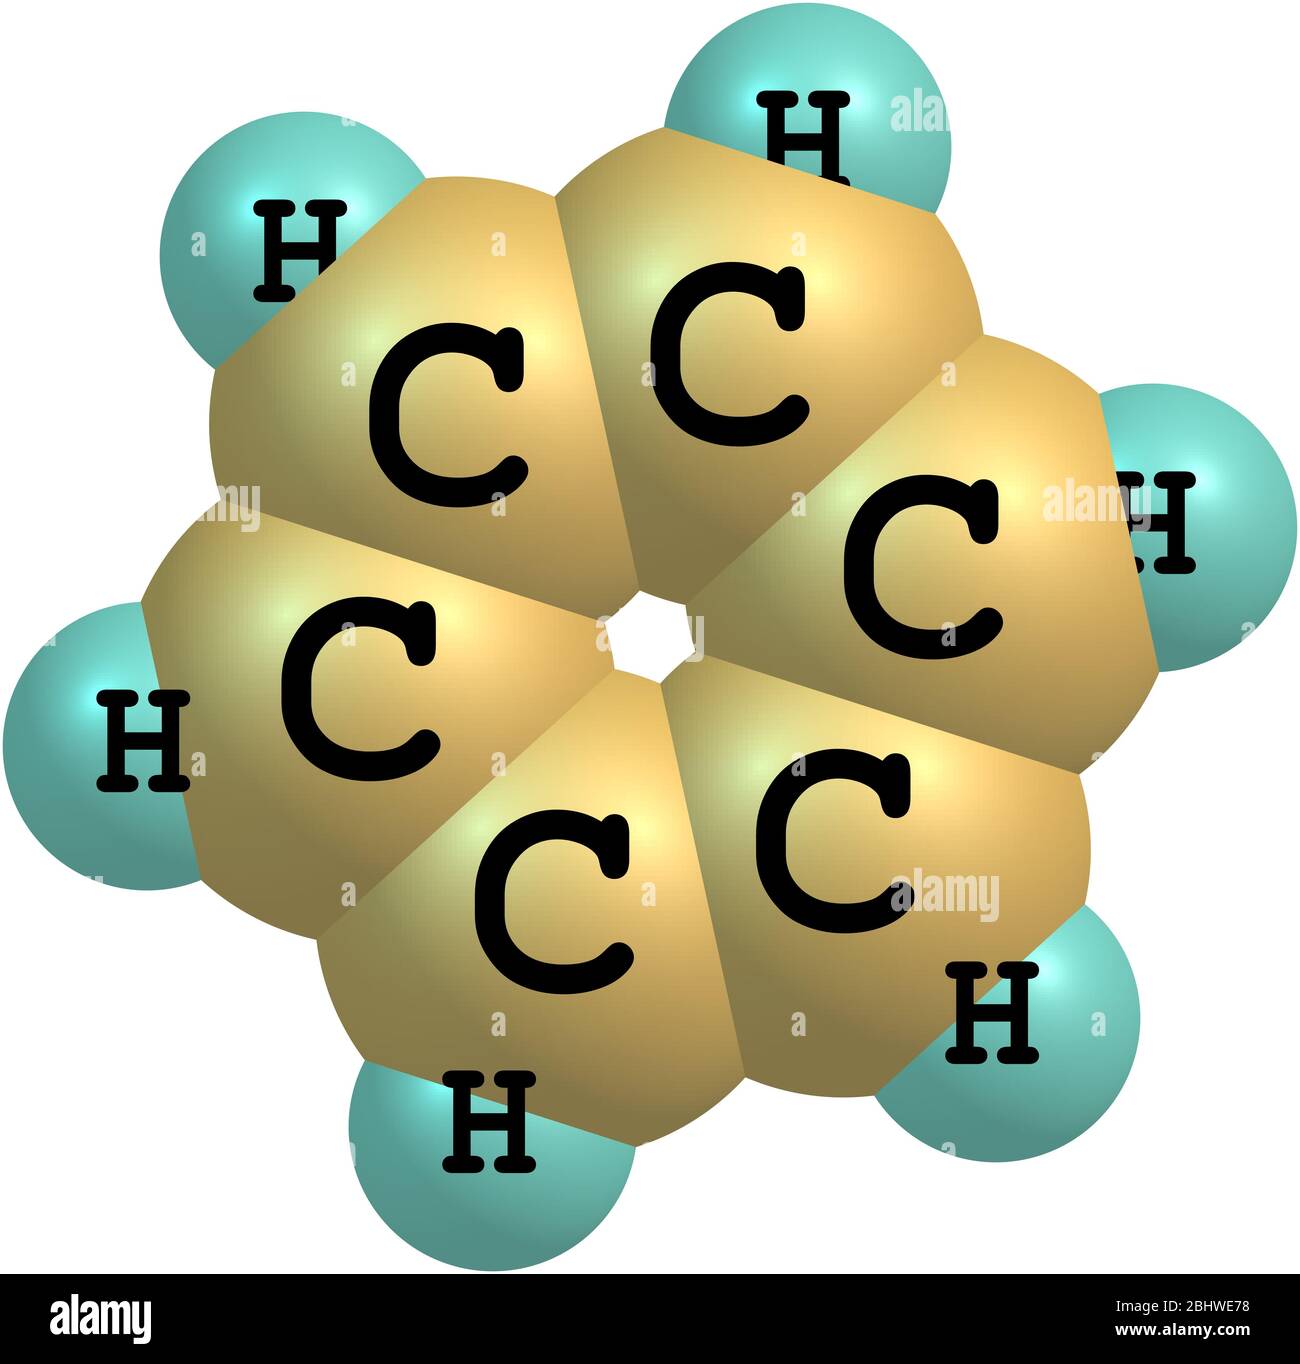 Benzene is an organic chemical compound. Its molecule is composed of 6  carbon atoms joined in a ring, with 1 hydrogen atom attached to each carbon  ato Stock Photo - Alamy